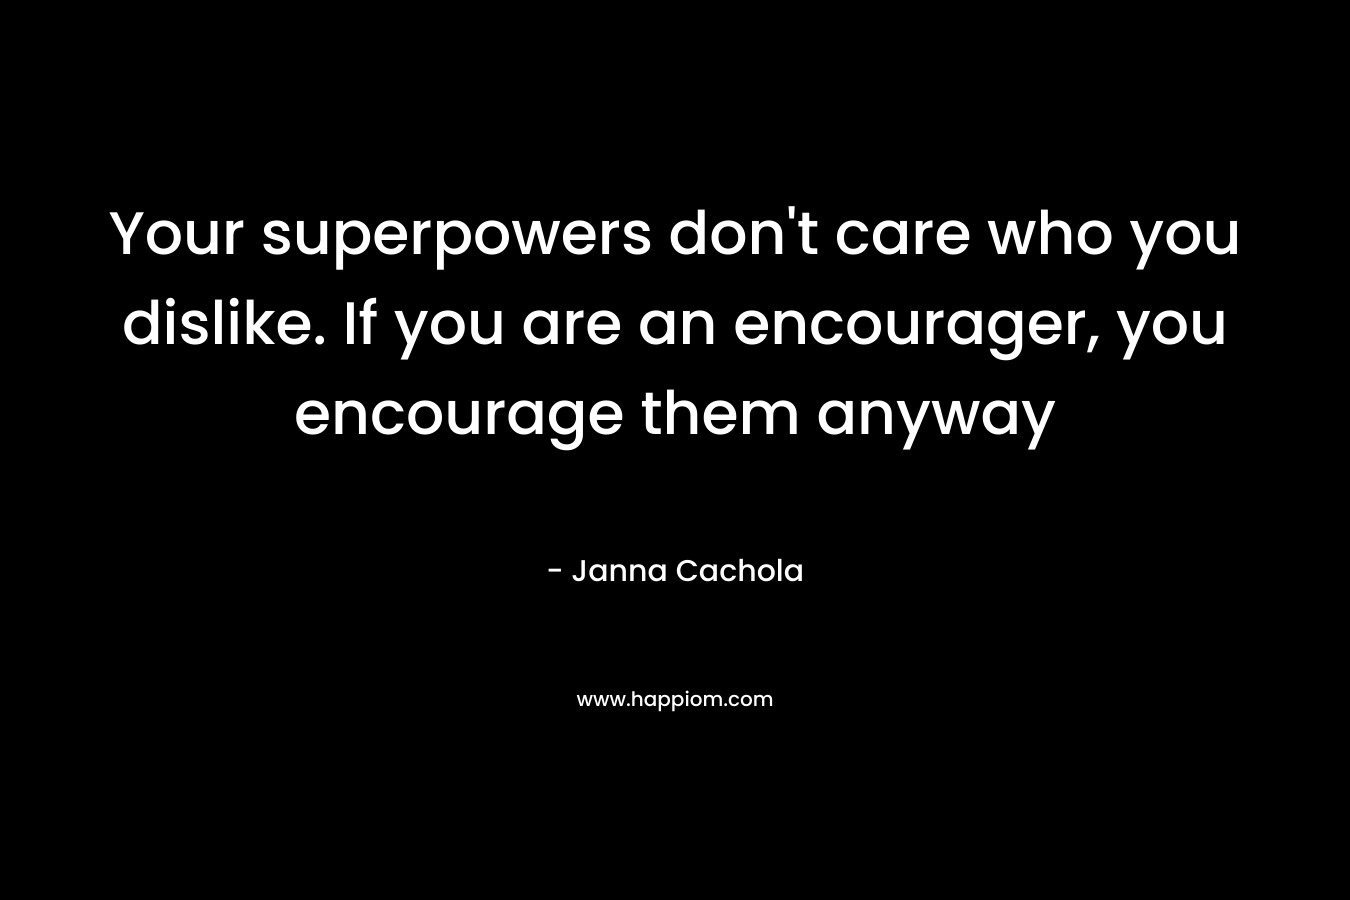 Your superpowers don’t care who you dislike. If you are an encourager, you encourage them anyway – Janna Cachola